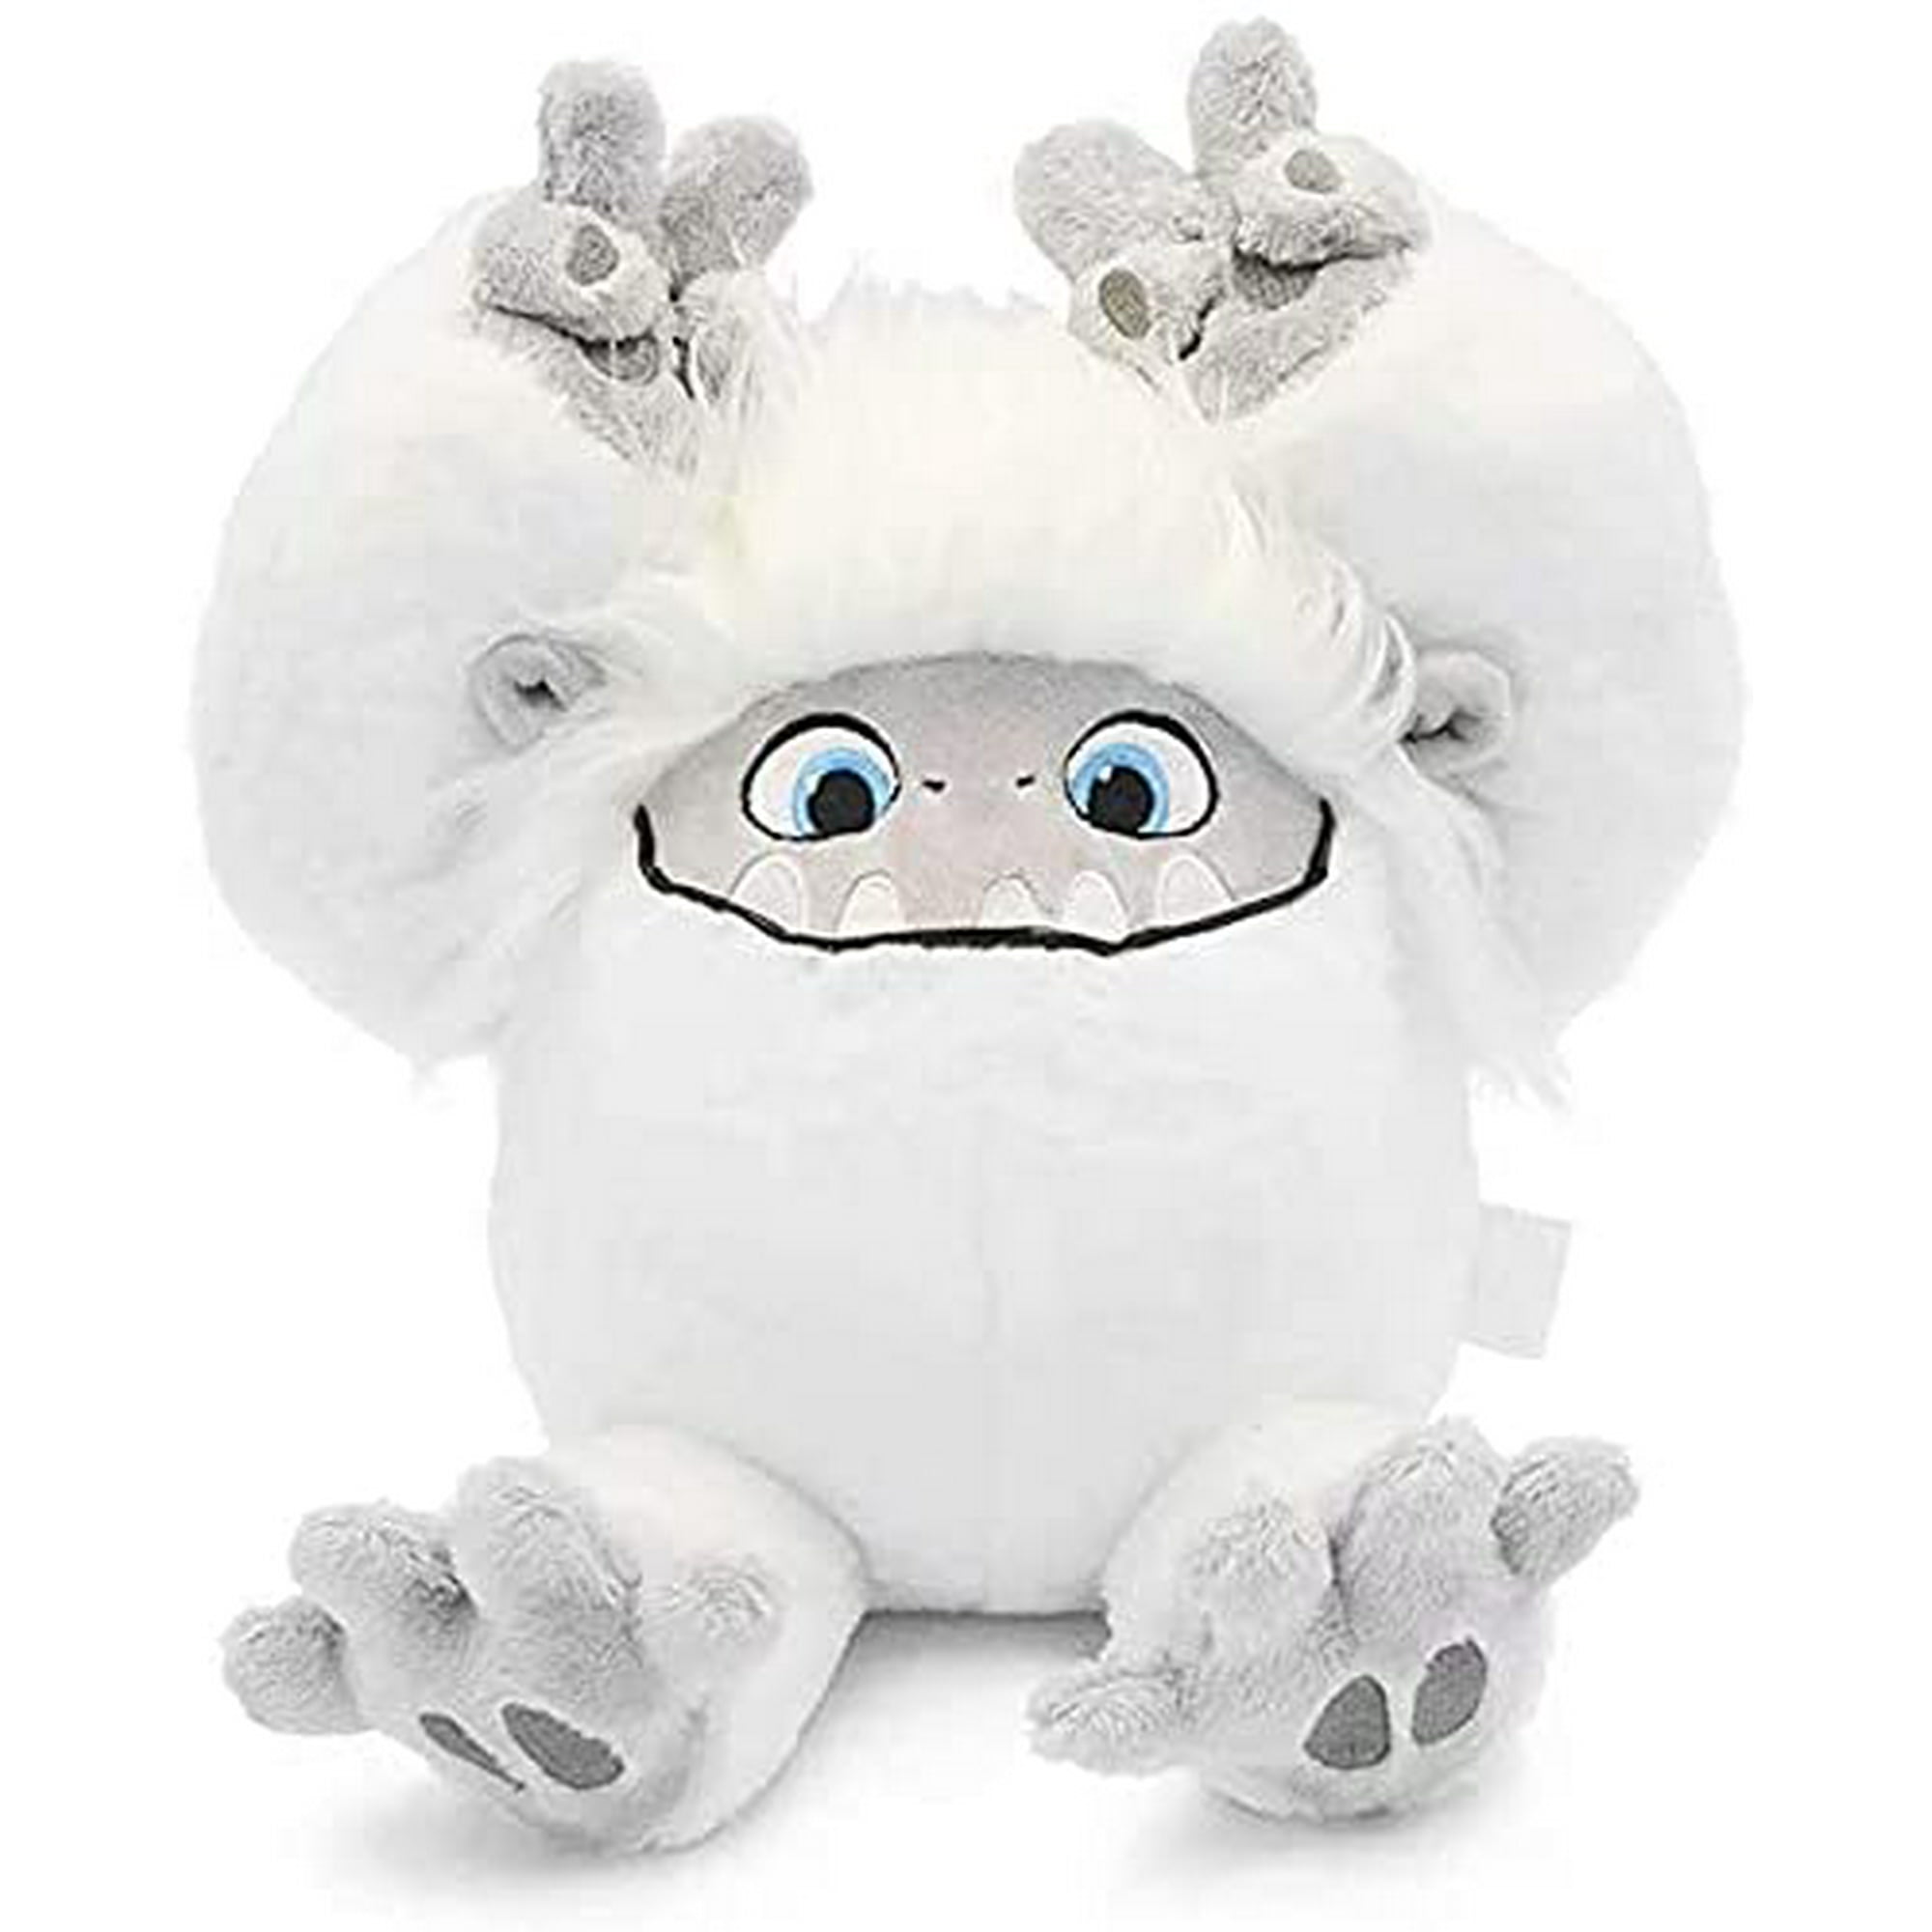 Abominable Everest Soft Toy Cute Snow Monster Stuffed Animal Plush Toy  Sleeping Super Soft Everest Yeti Doll Christmas Birthday Gift for Kids |  Walmart Canada